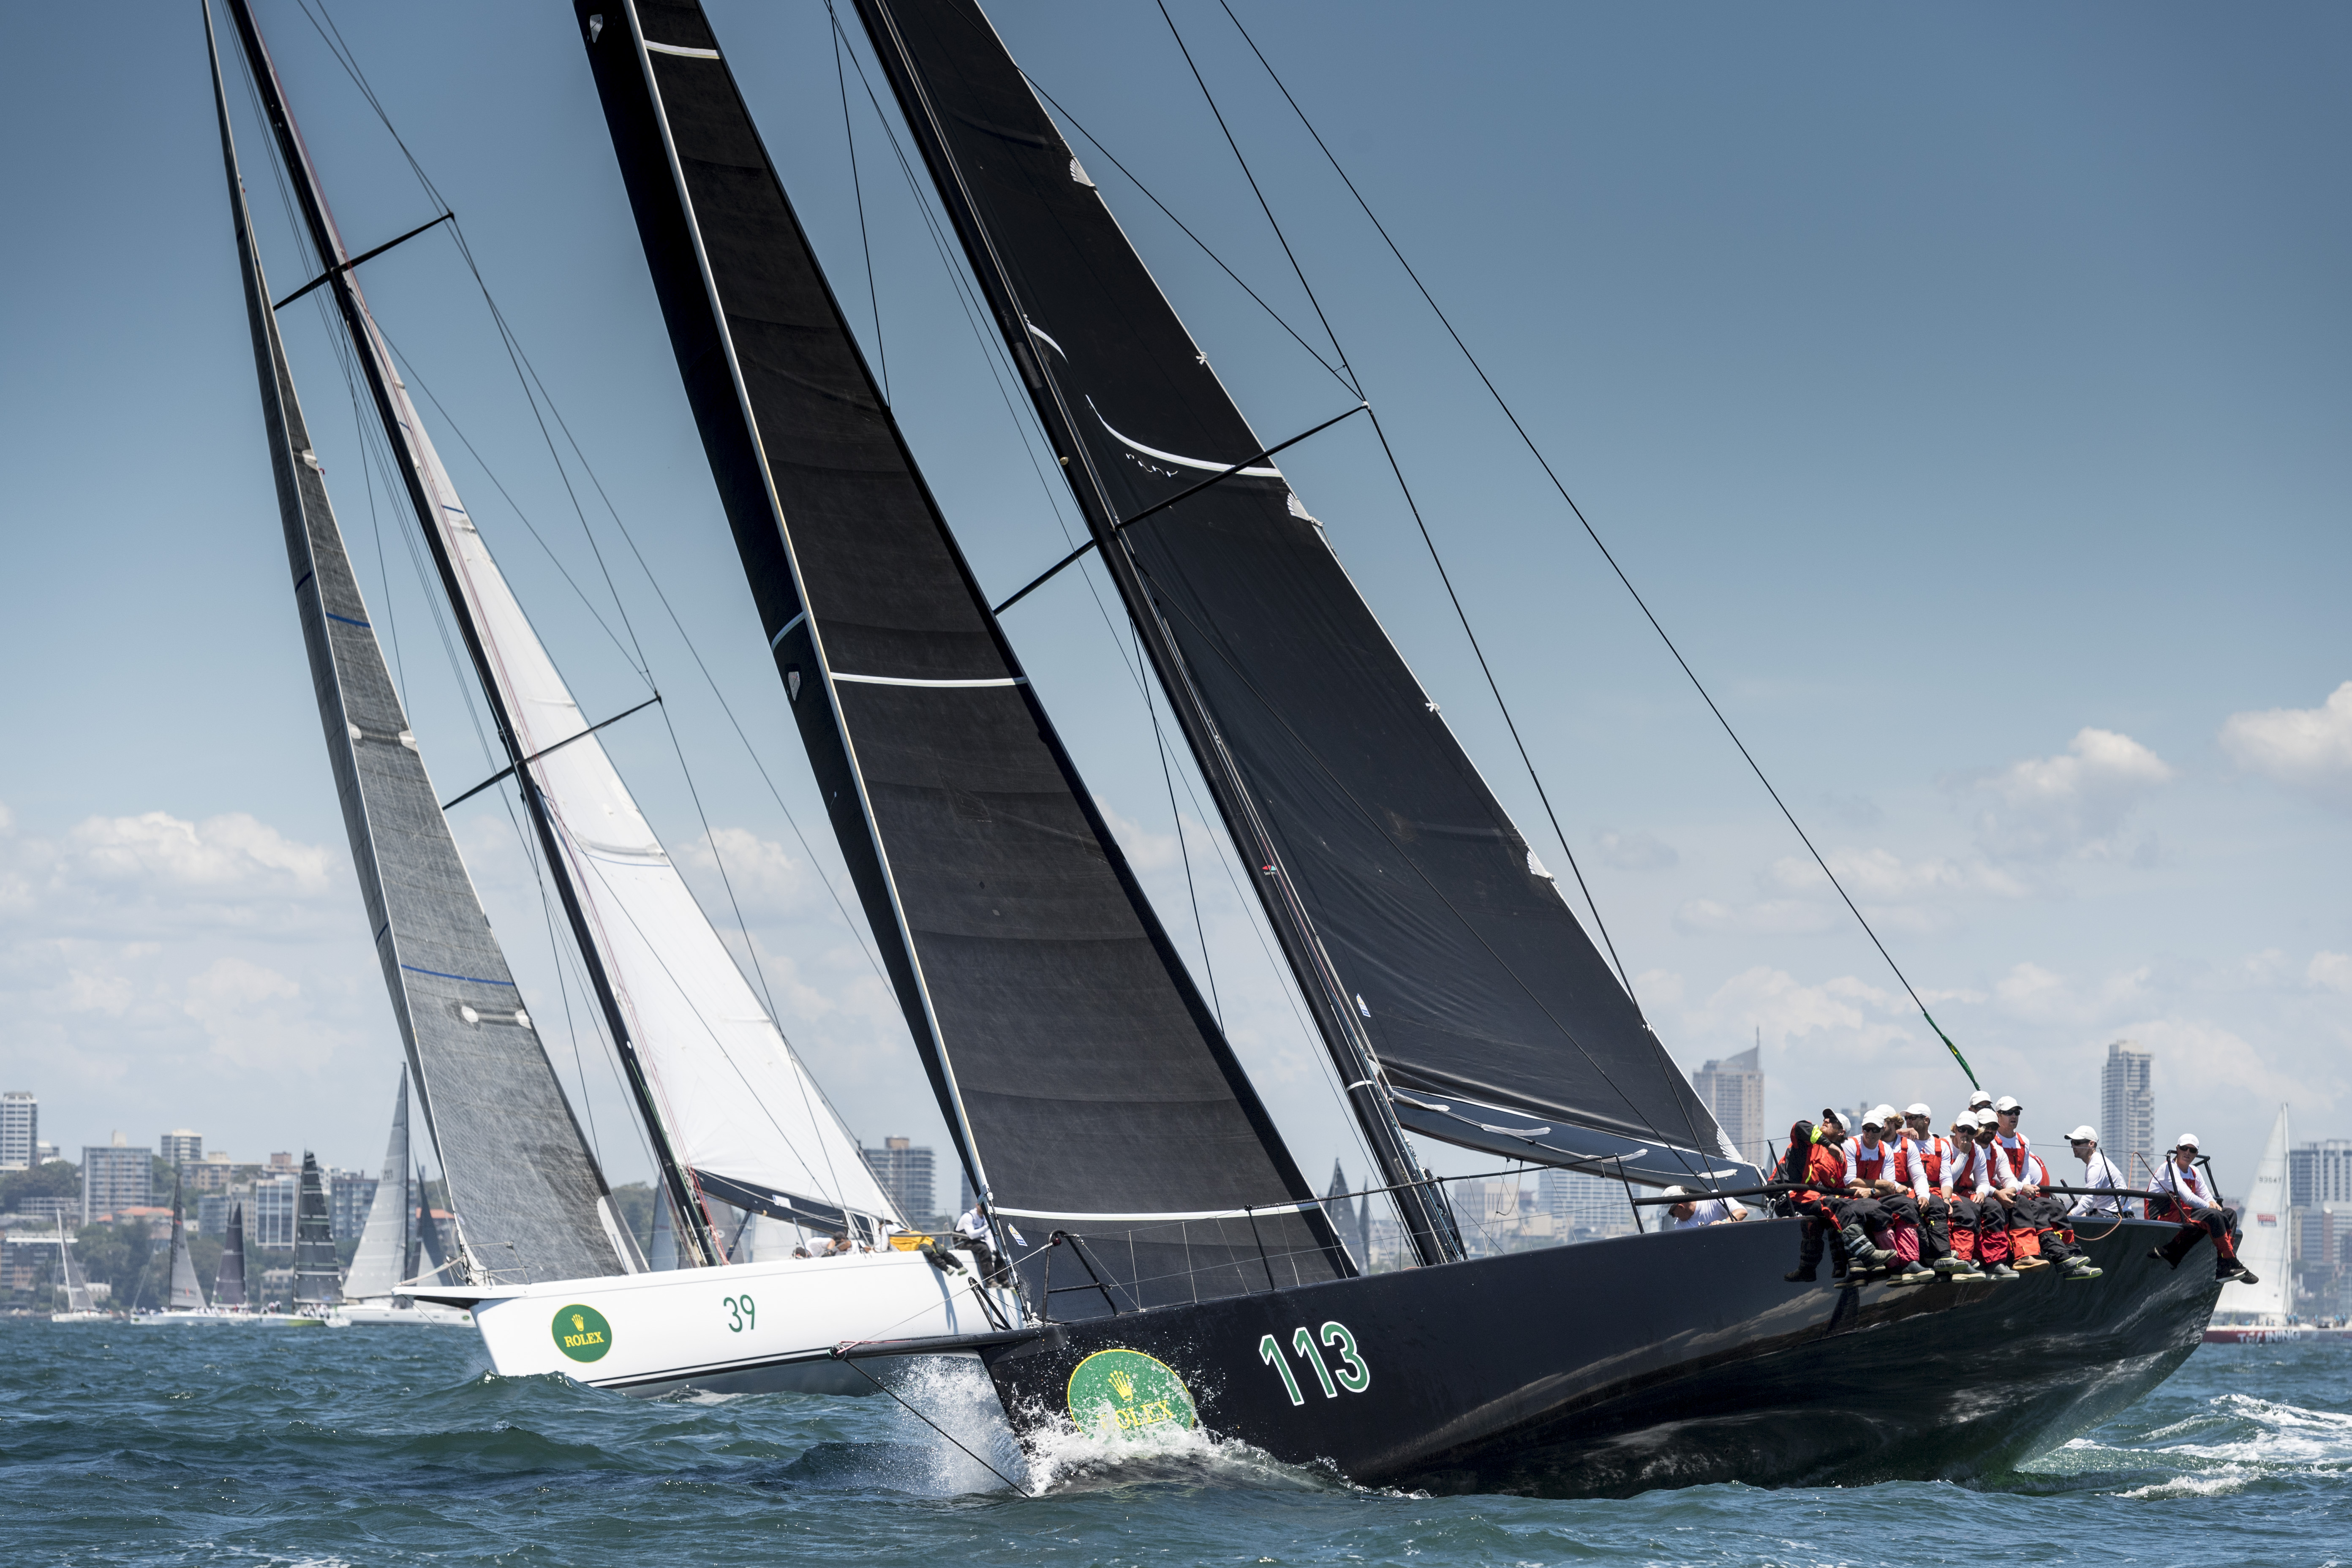 TRITON and CHINESE WHISPER making good progress shortly after the 2016 Rolex Sydney Hobart race start